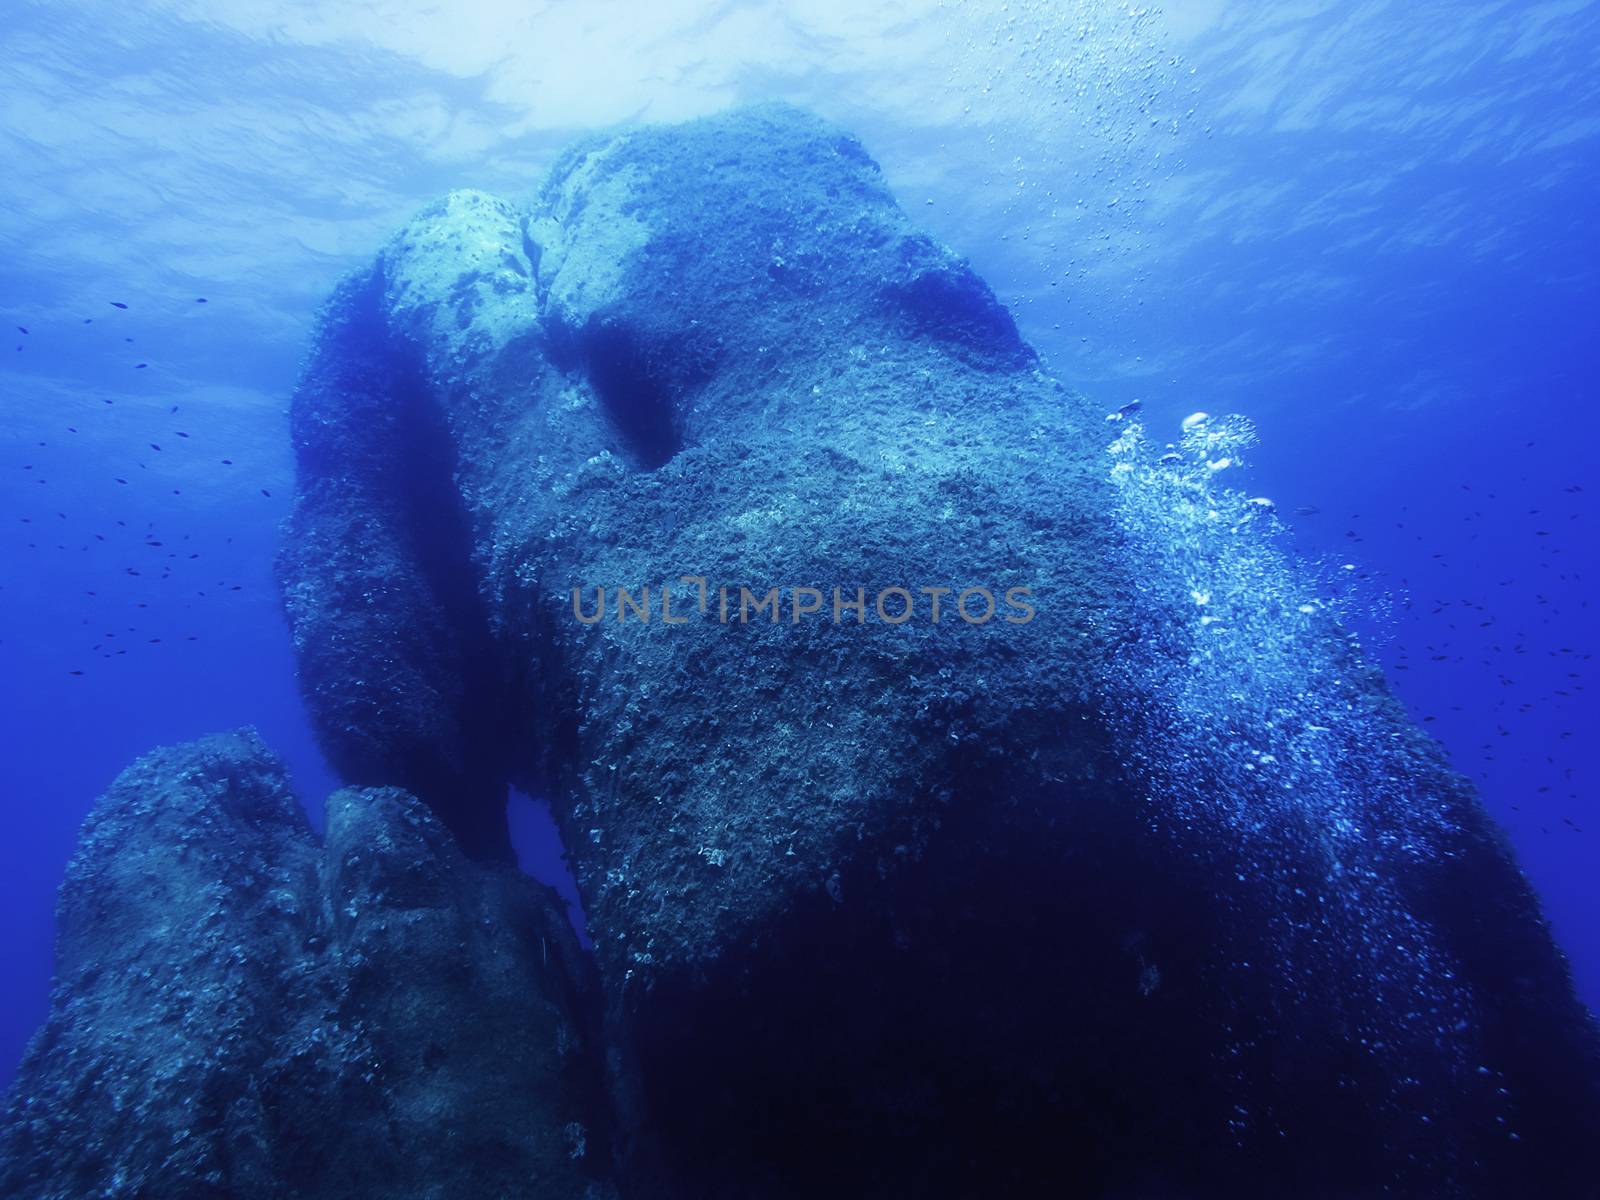 Background of a huge rock submerged in the sea by raulmelldo